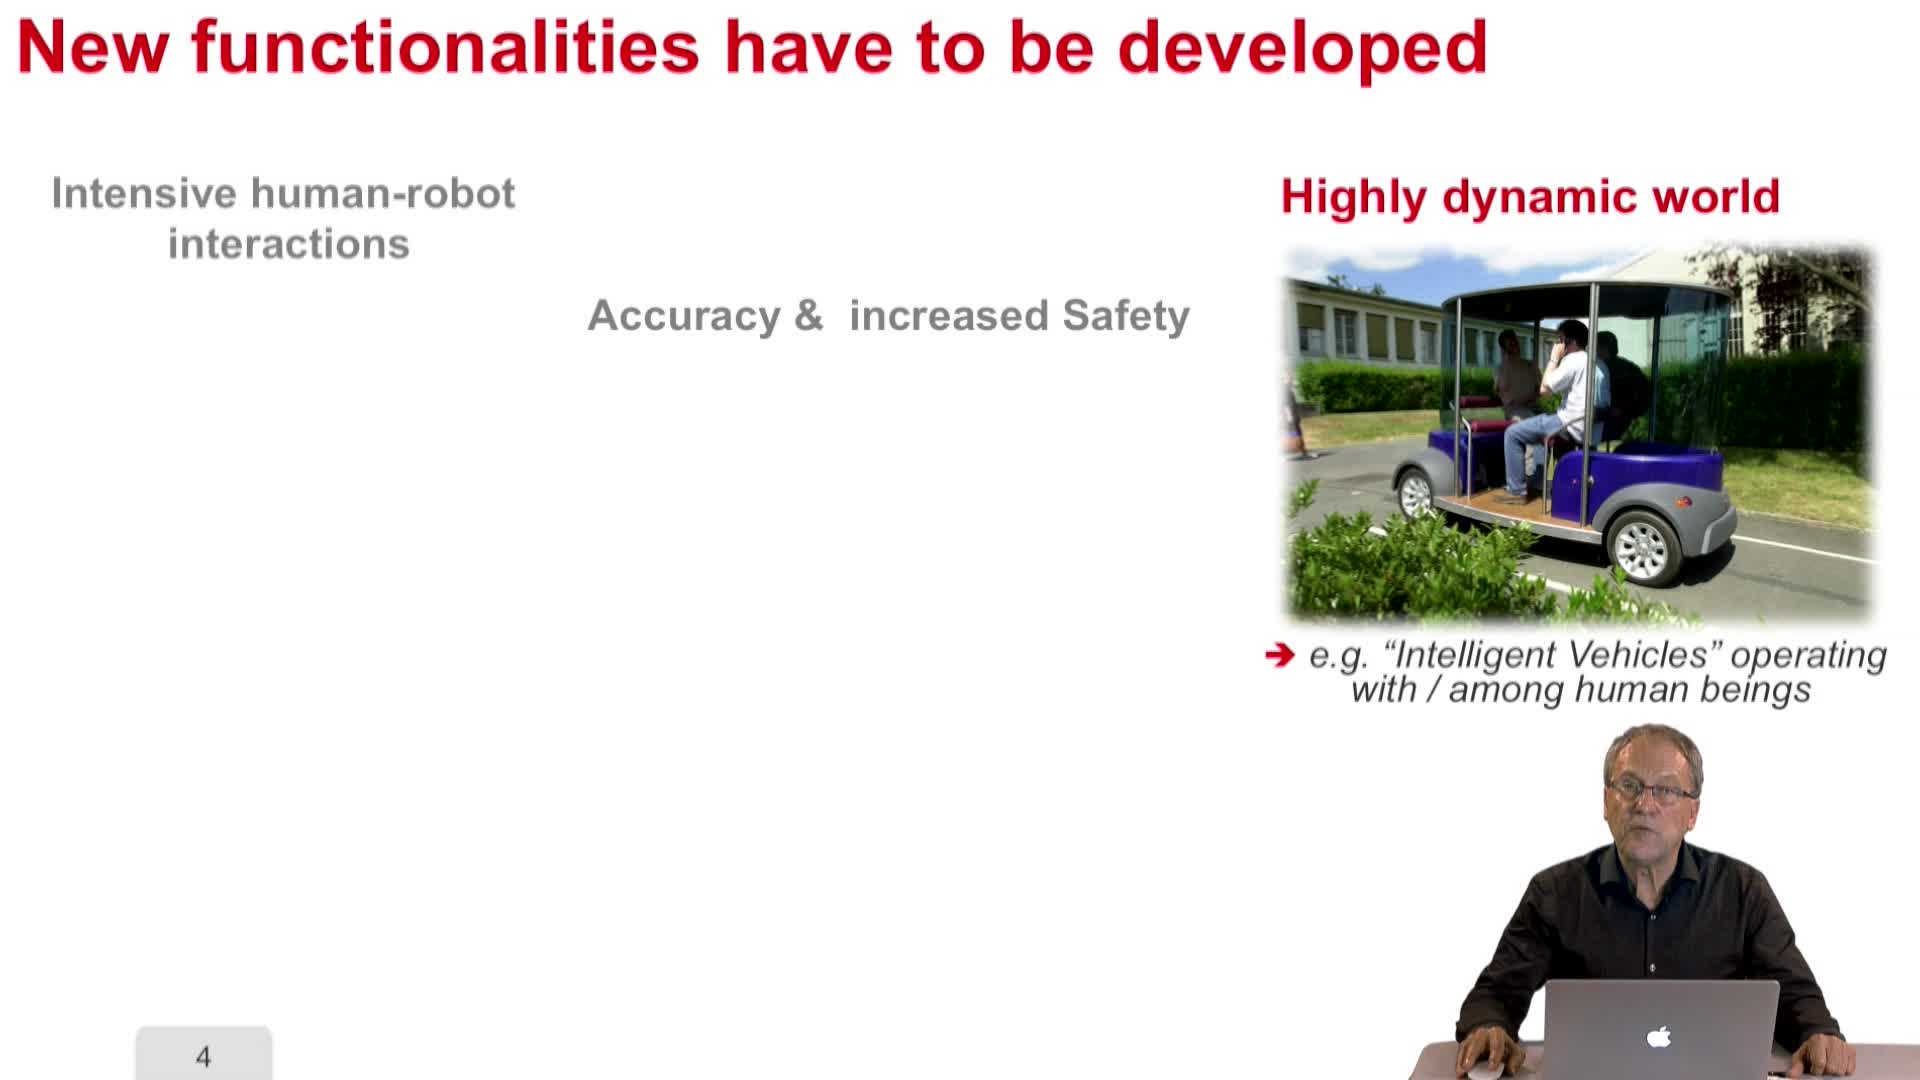 1.3. New challenges for Robotics in Human Environments